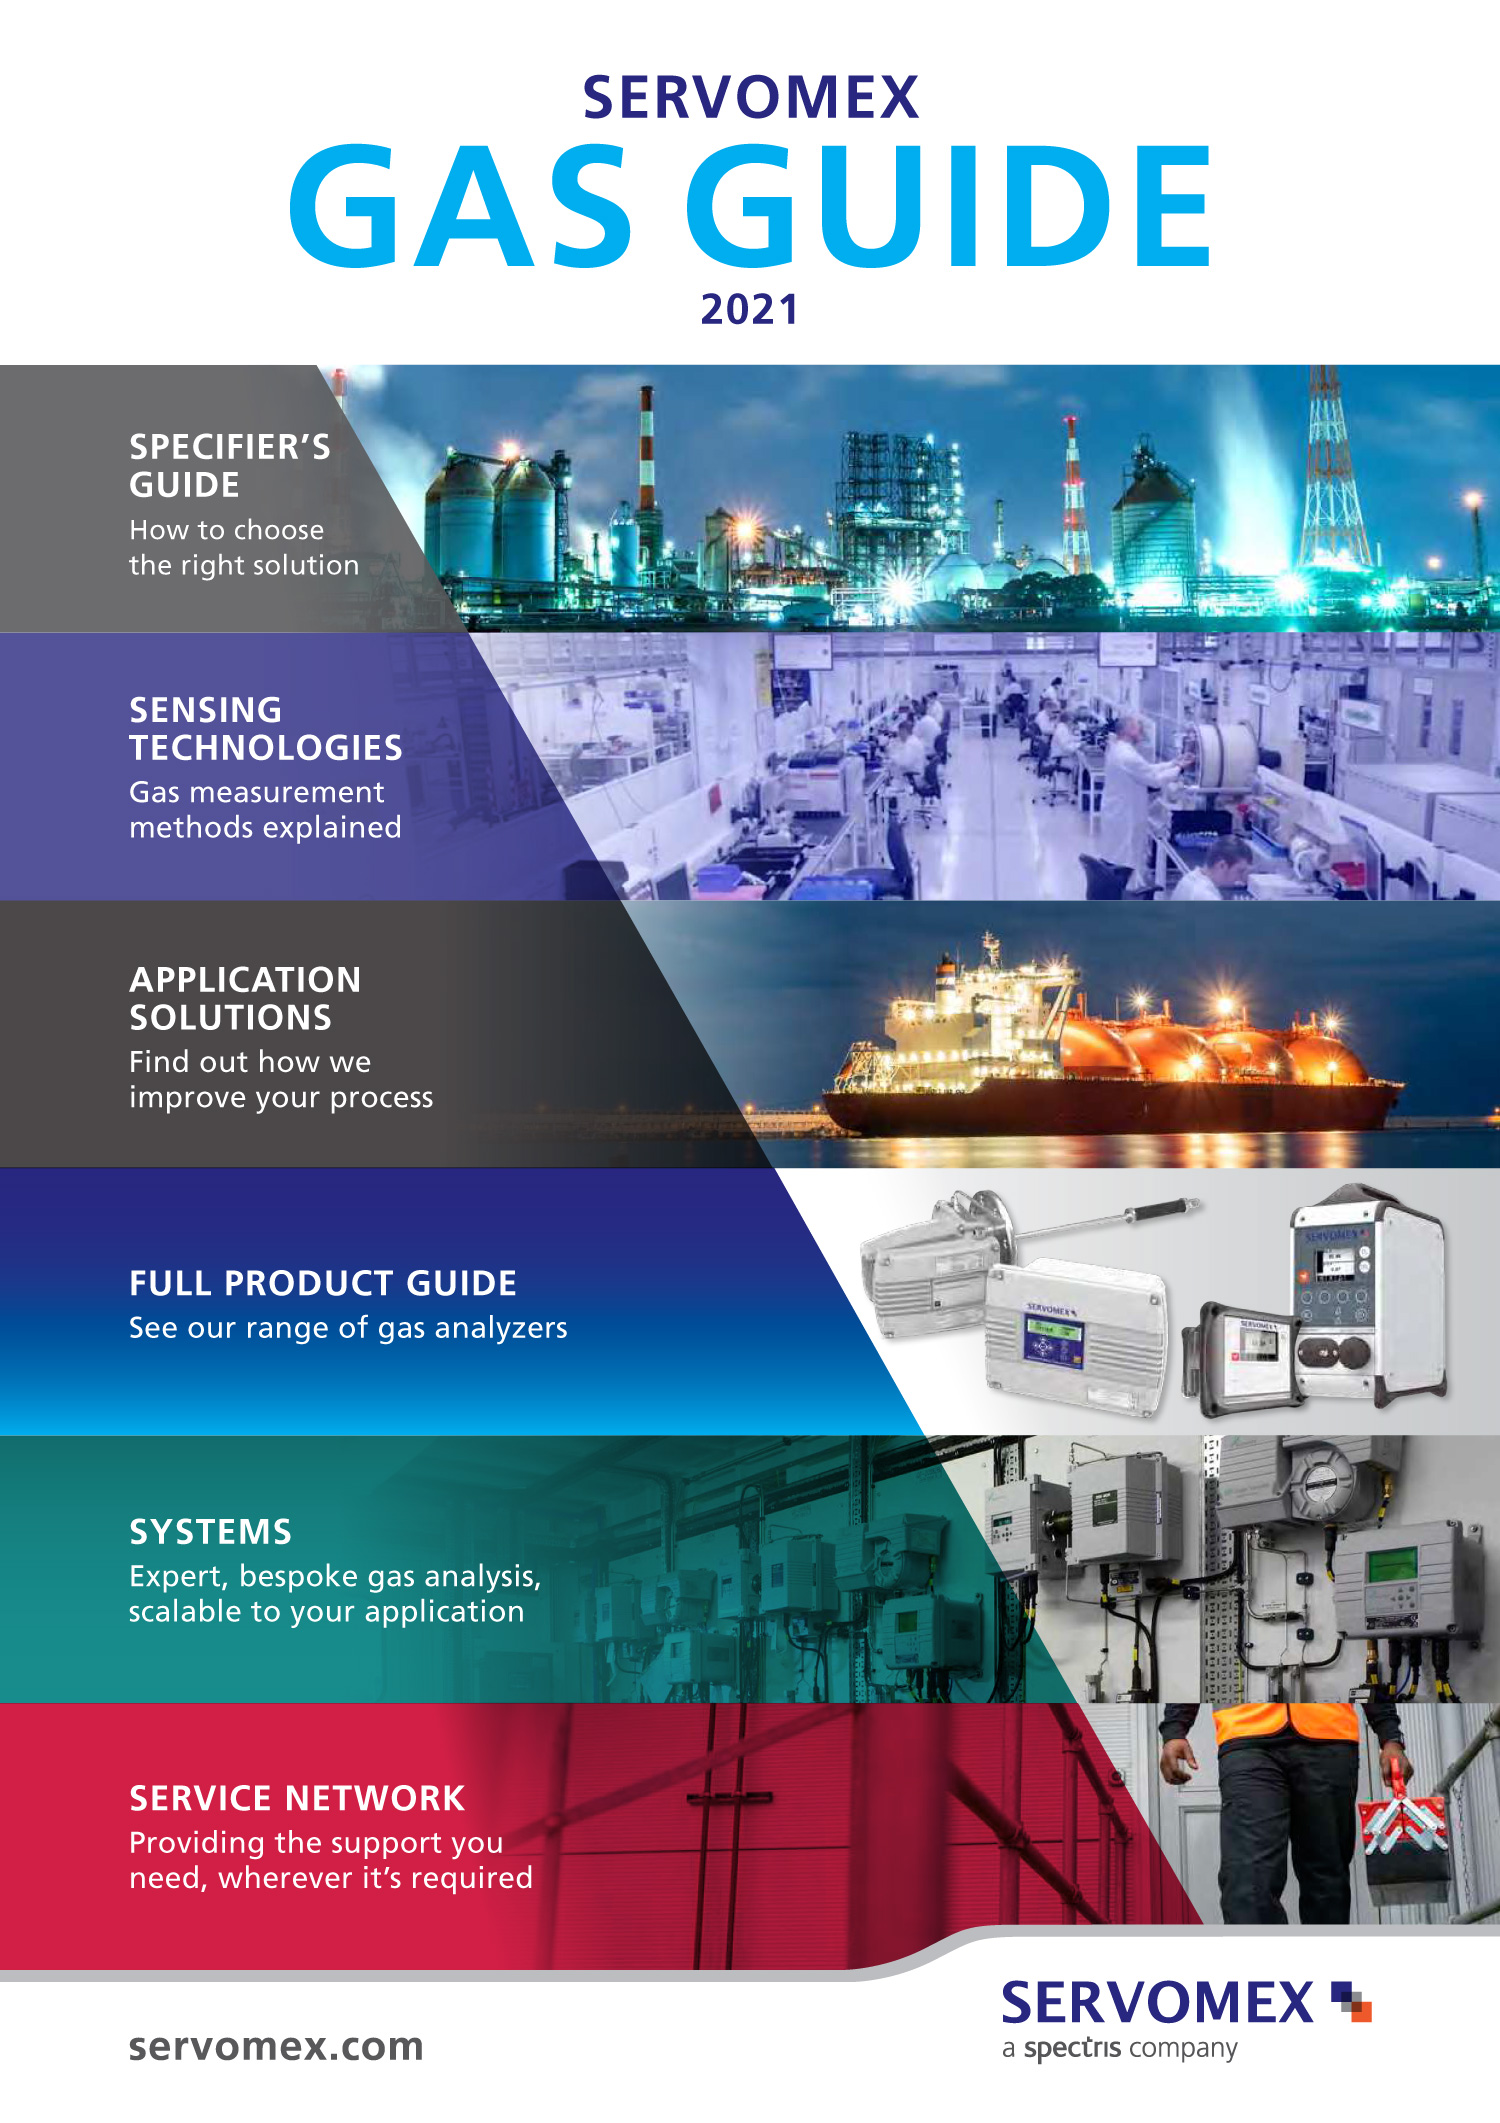 SERVOMEX 2021 Gas Guide is a comprehensive handbook offering everything you need to know about its gas analysis and sensing solutions - Discover SERVOMEX best analysis for your industrial applications.